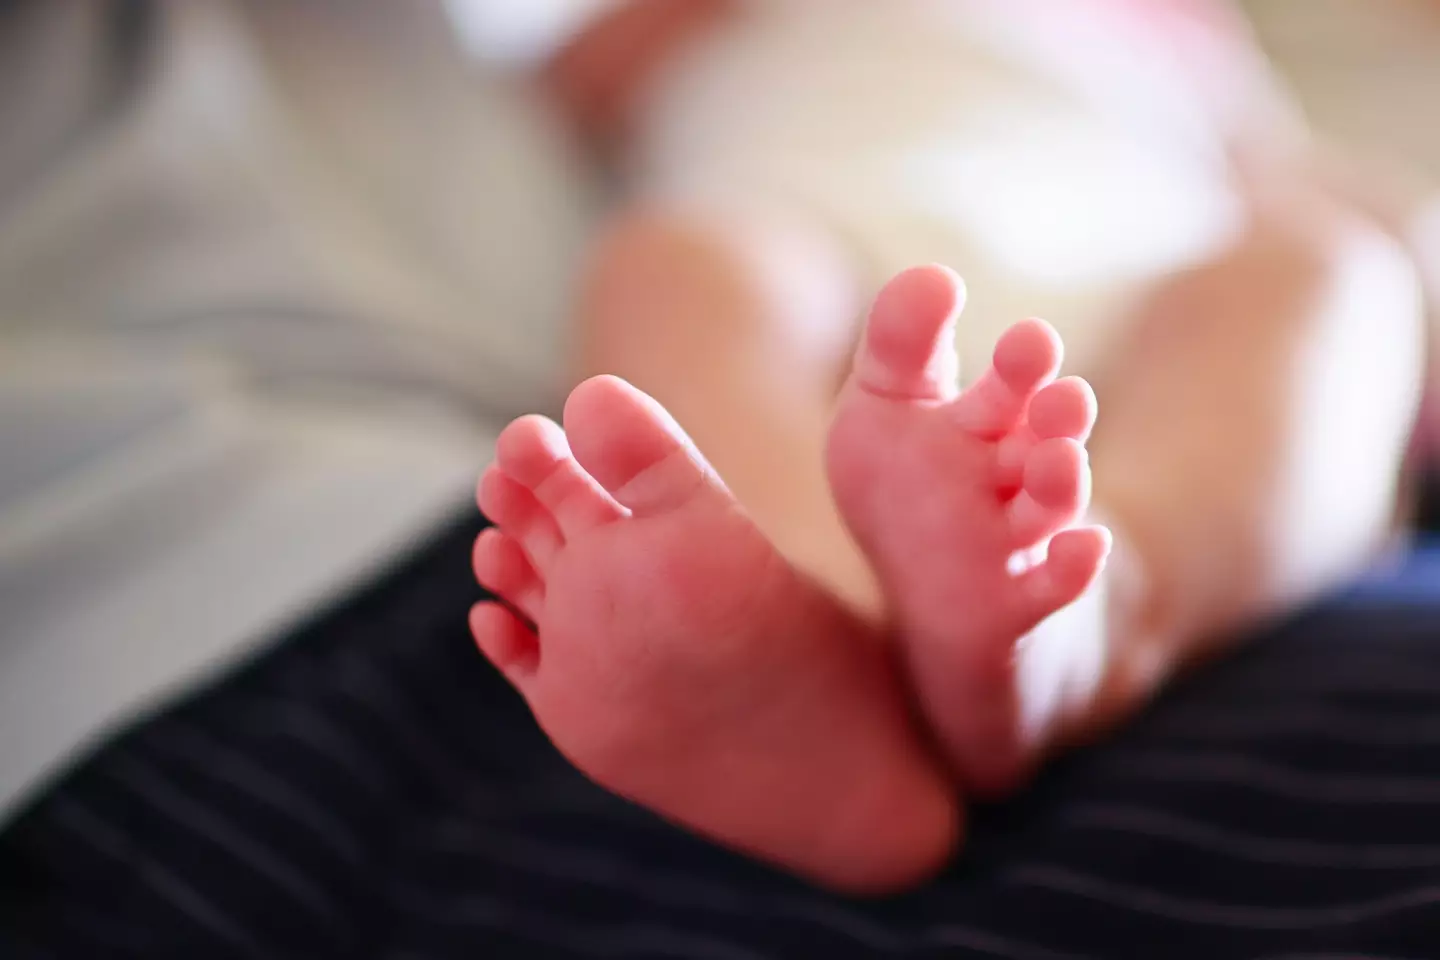 A young baby's feet.